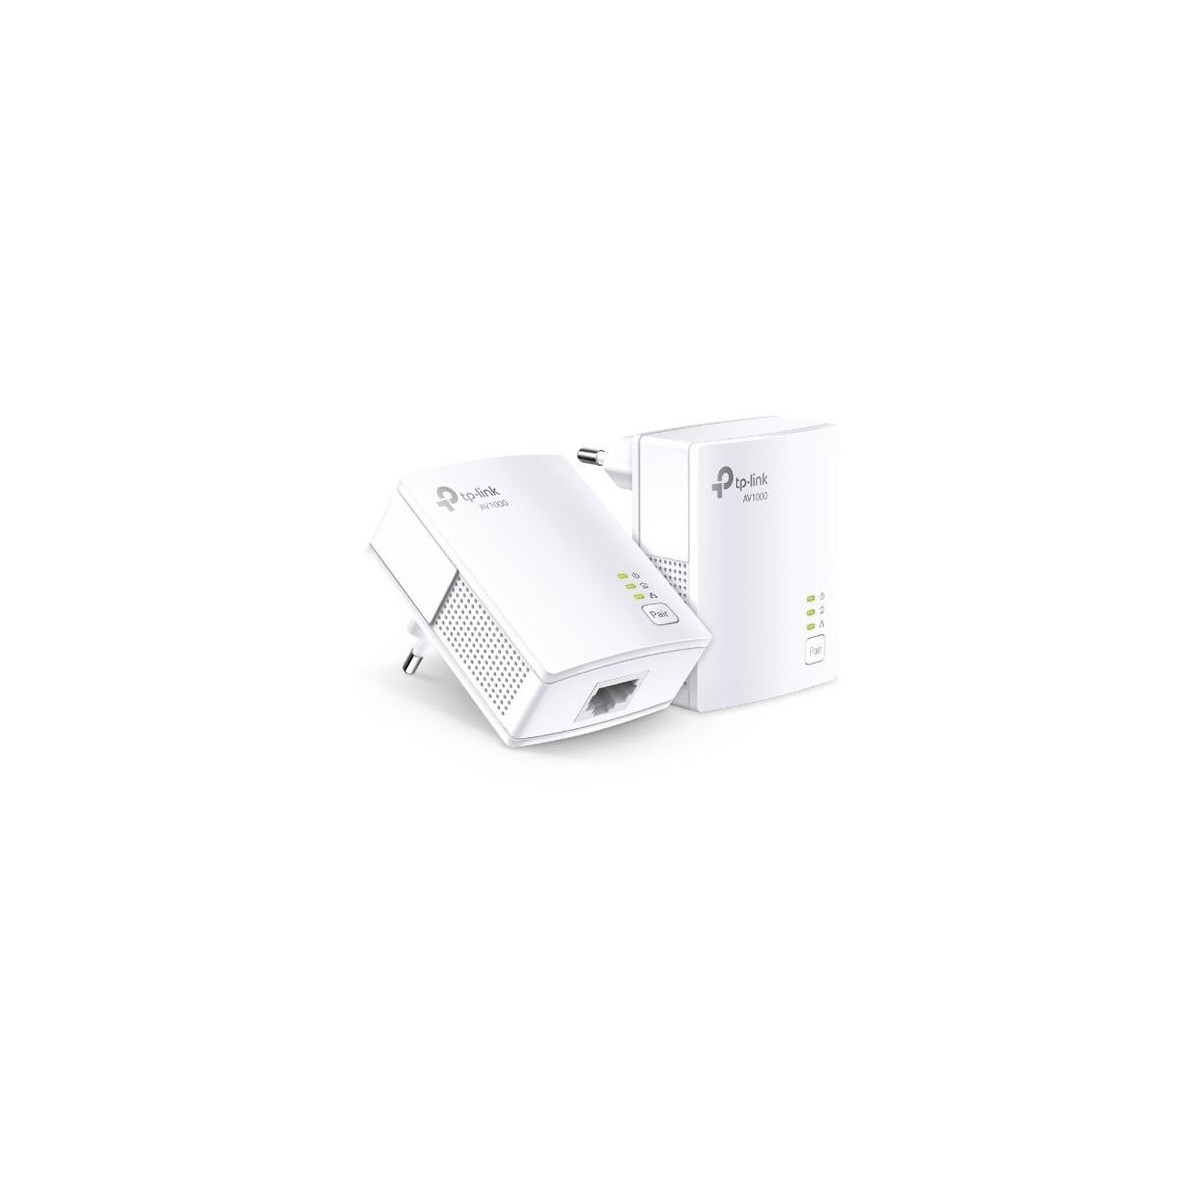 More about Repeater TP-LINK TL-PA7017